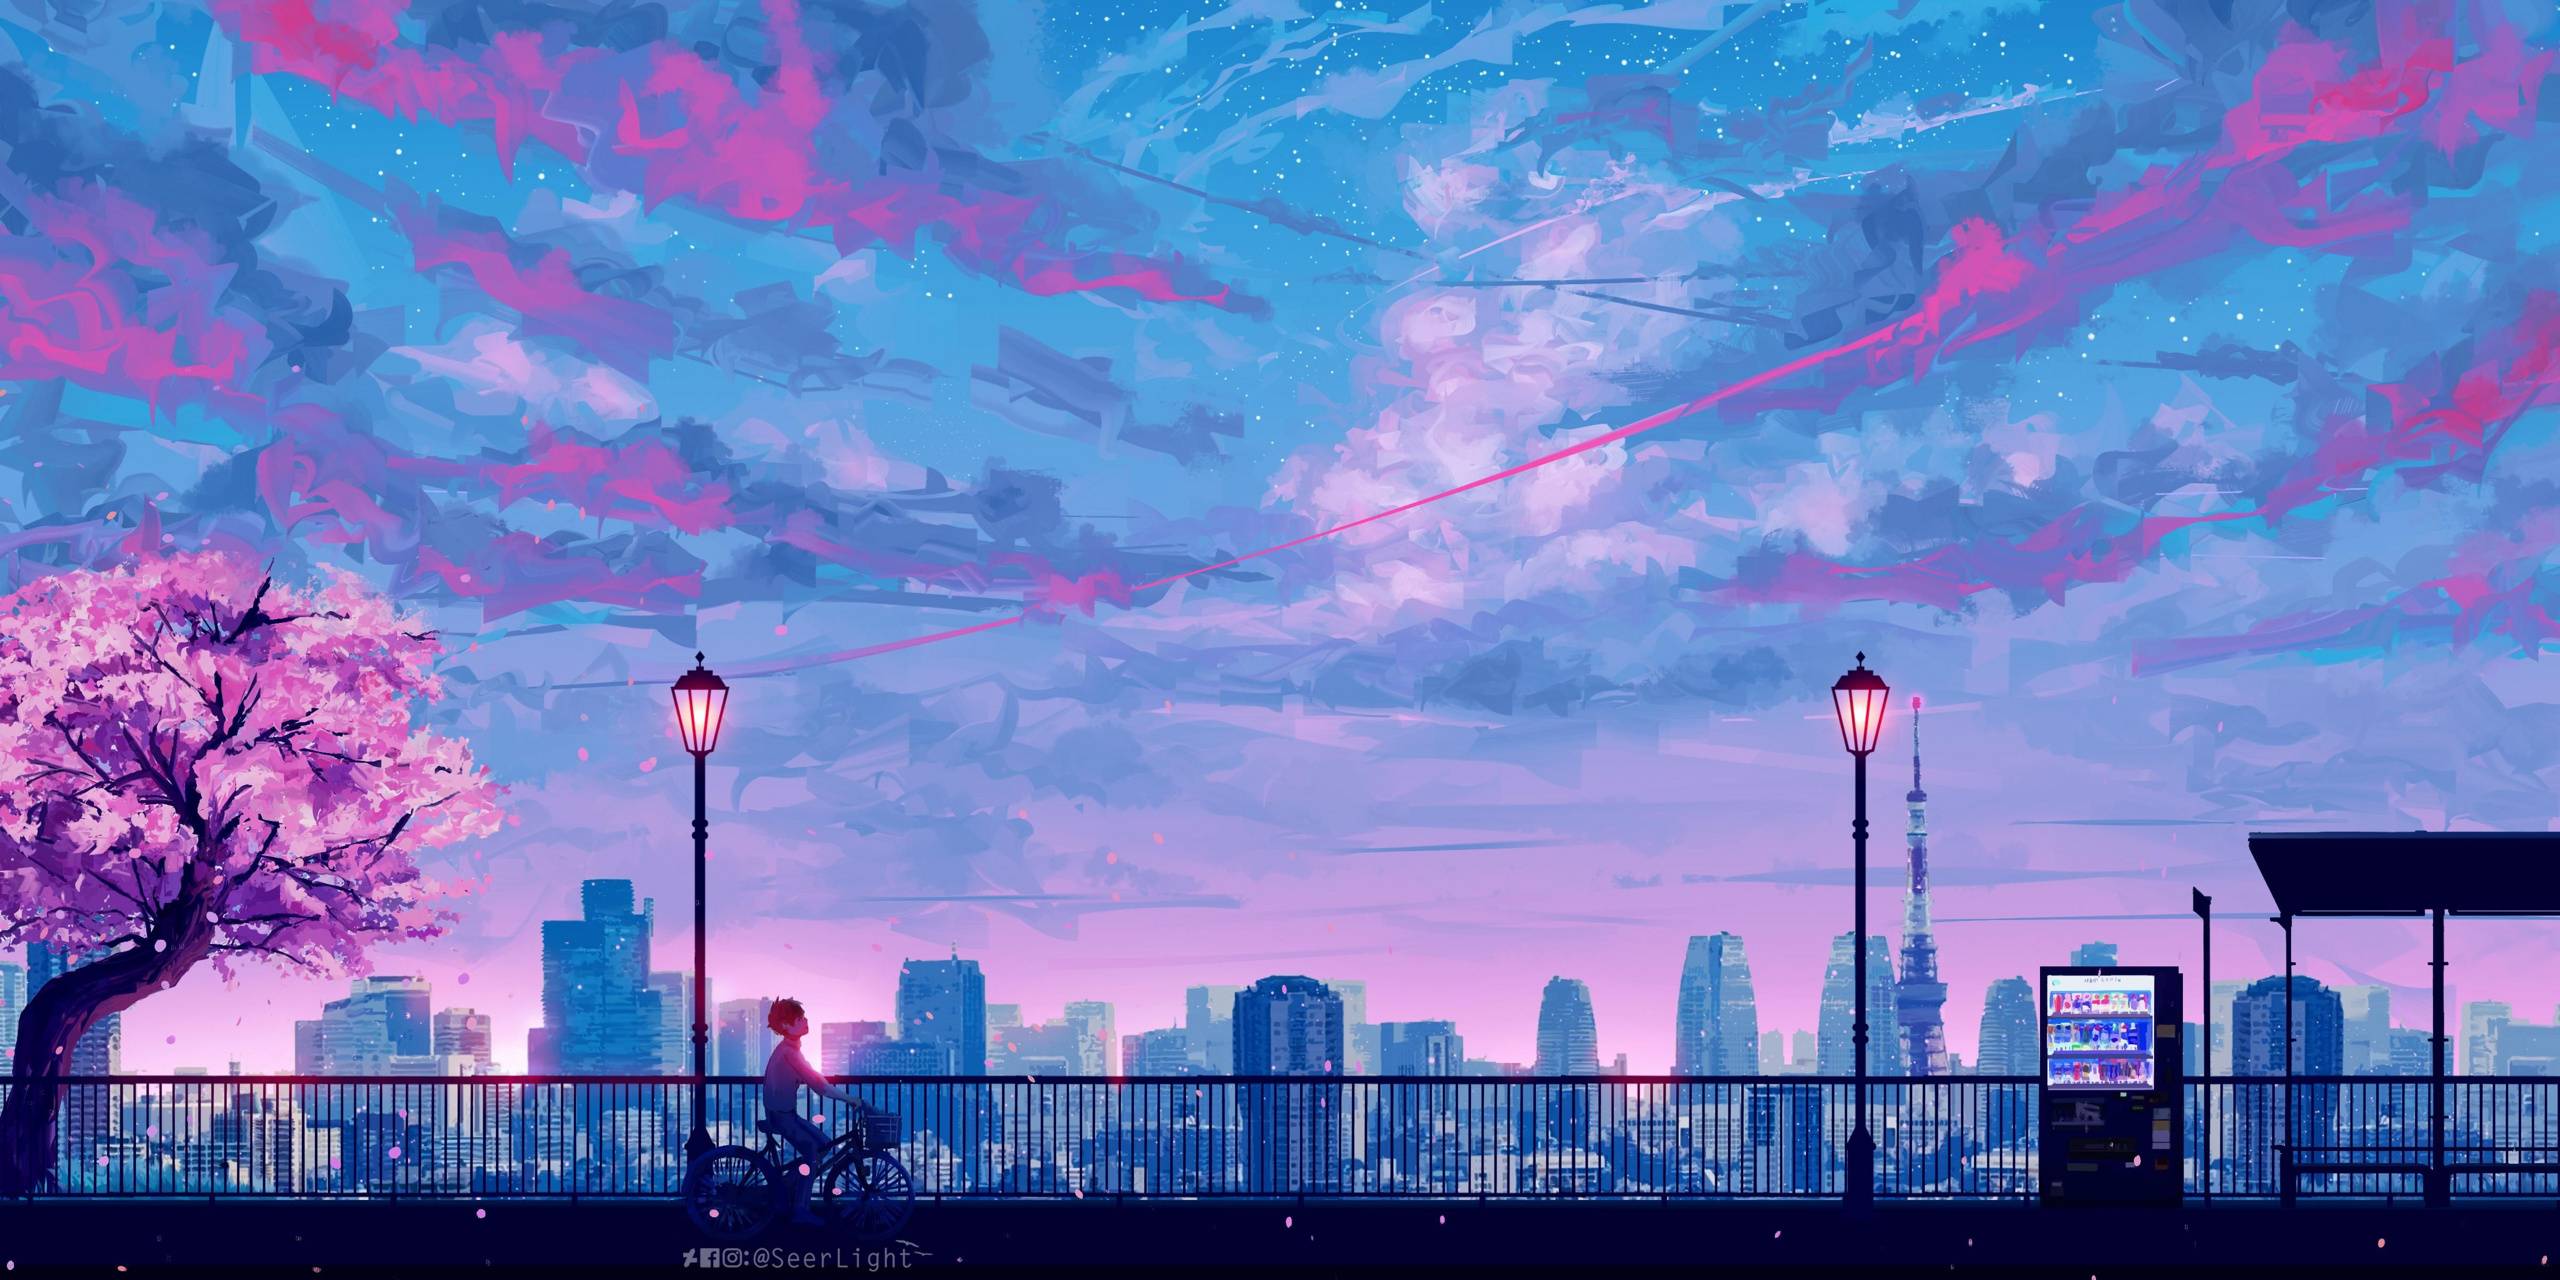 6+ Chill Anime Wallpapers for iPhone and Android by Julie Watson